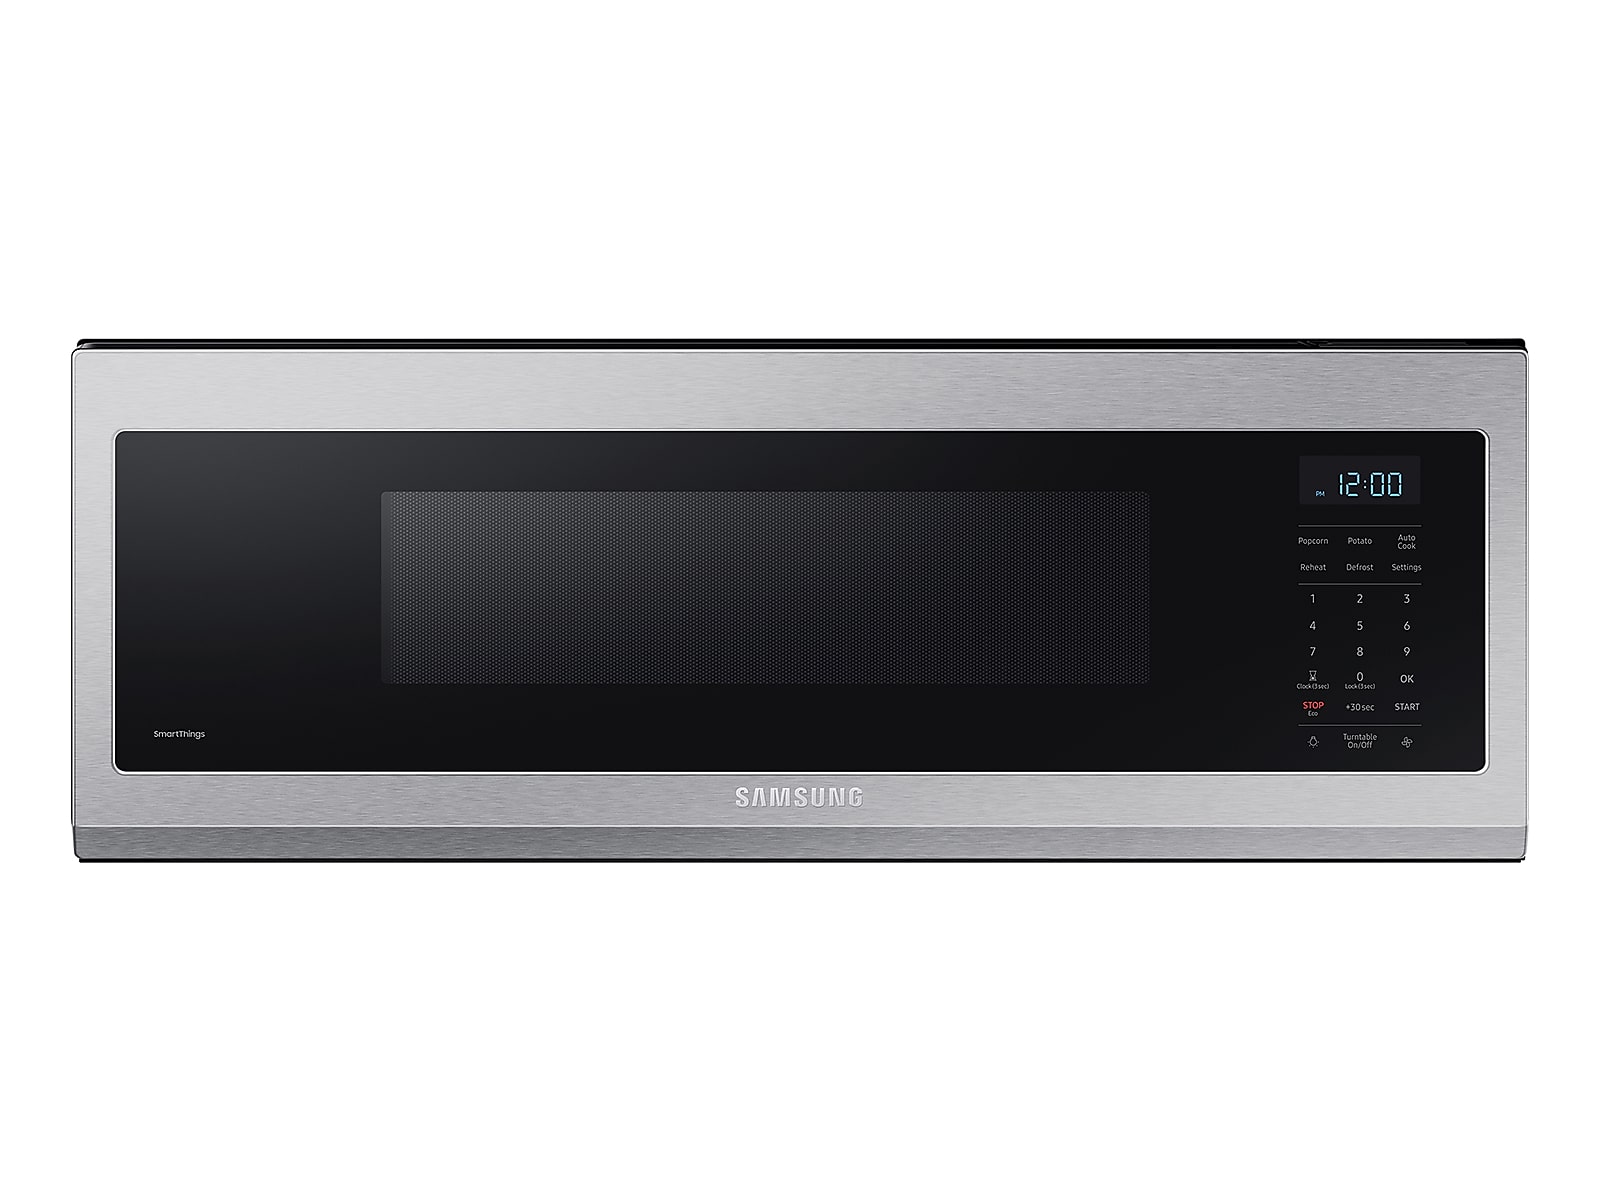 Samsung 1.1 cu. ft. Smart SLIM Over-the-Range Microwave with 400 CFM Hood Ventilation, Wi-Fi & Voice Control in Stainless Steel(ME11A7510DS/AA) photo